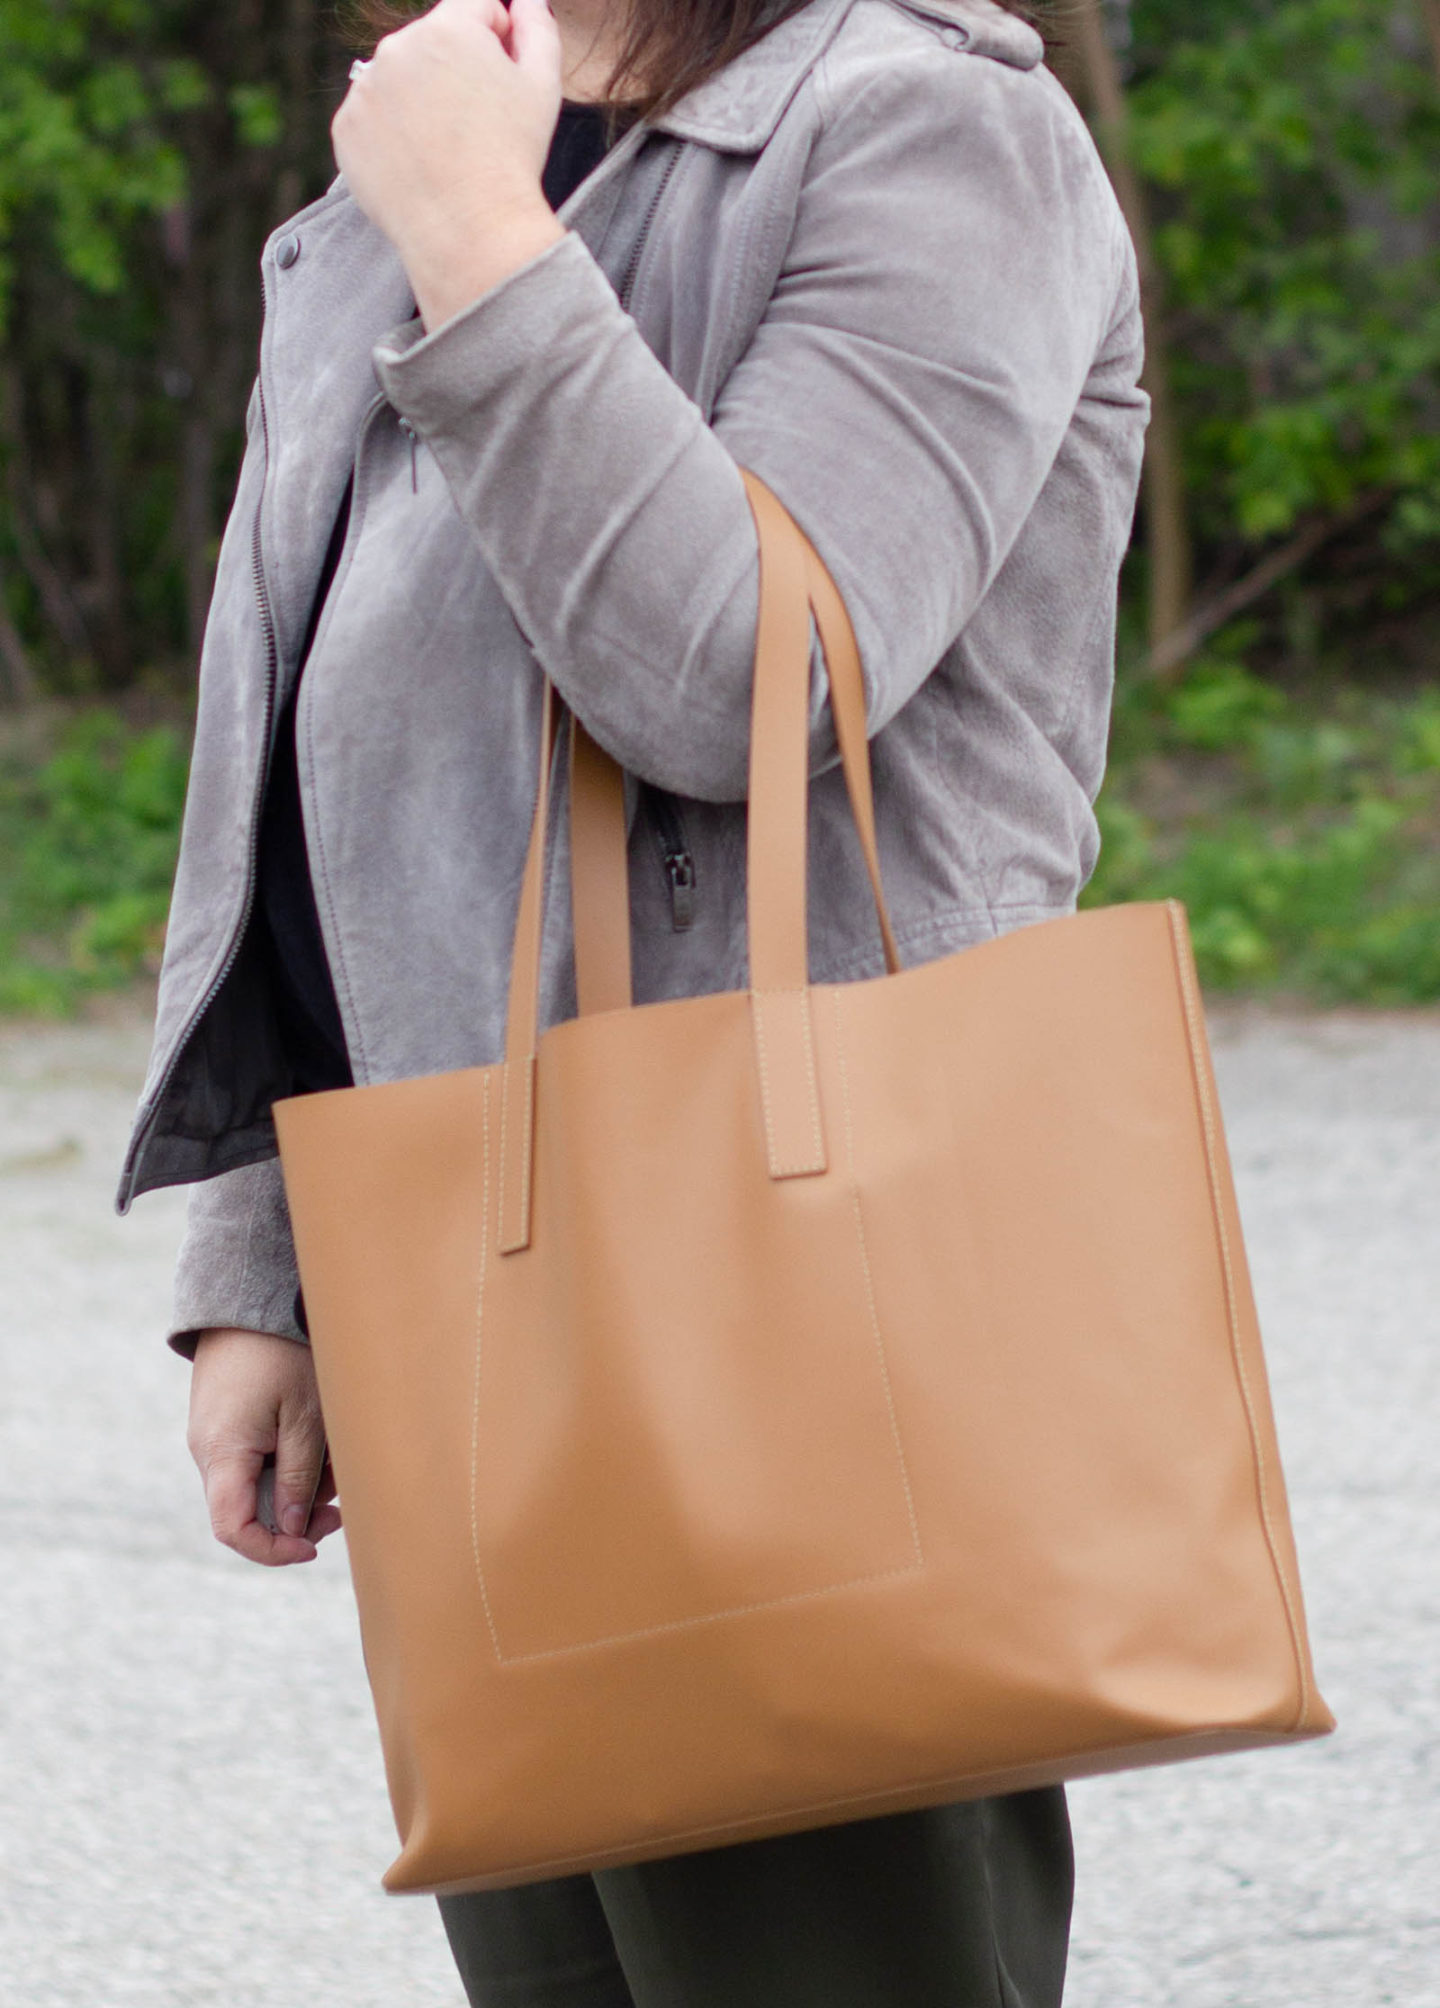 everlane day market tote review